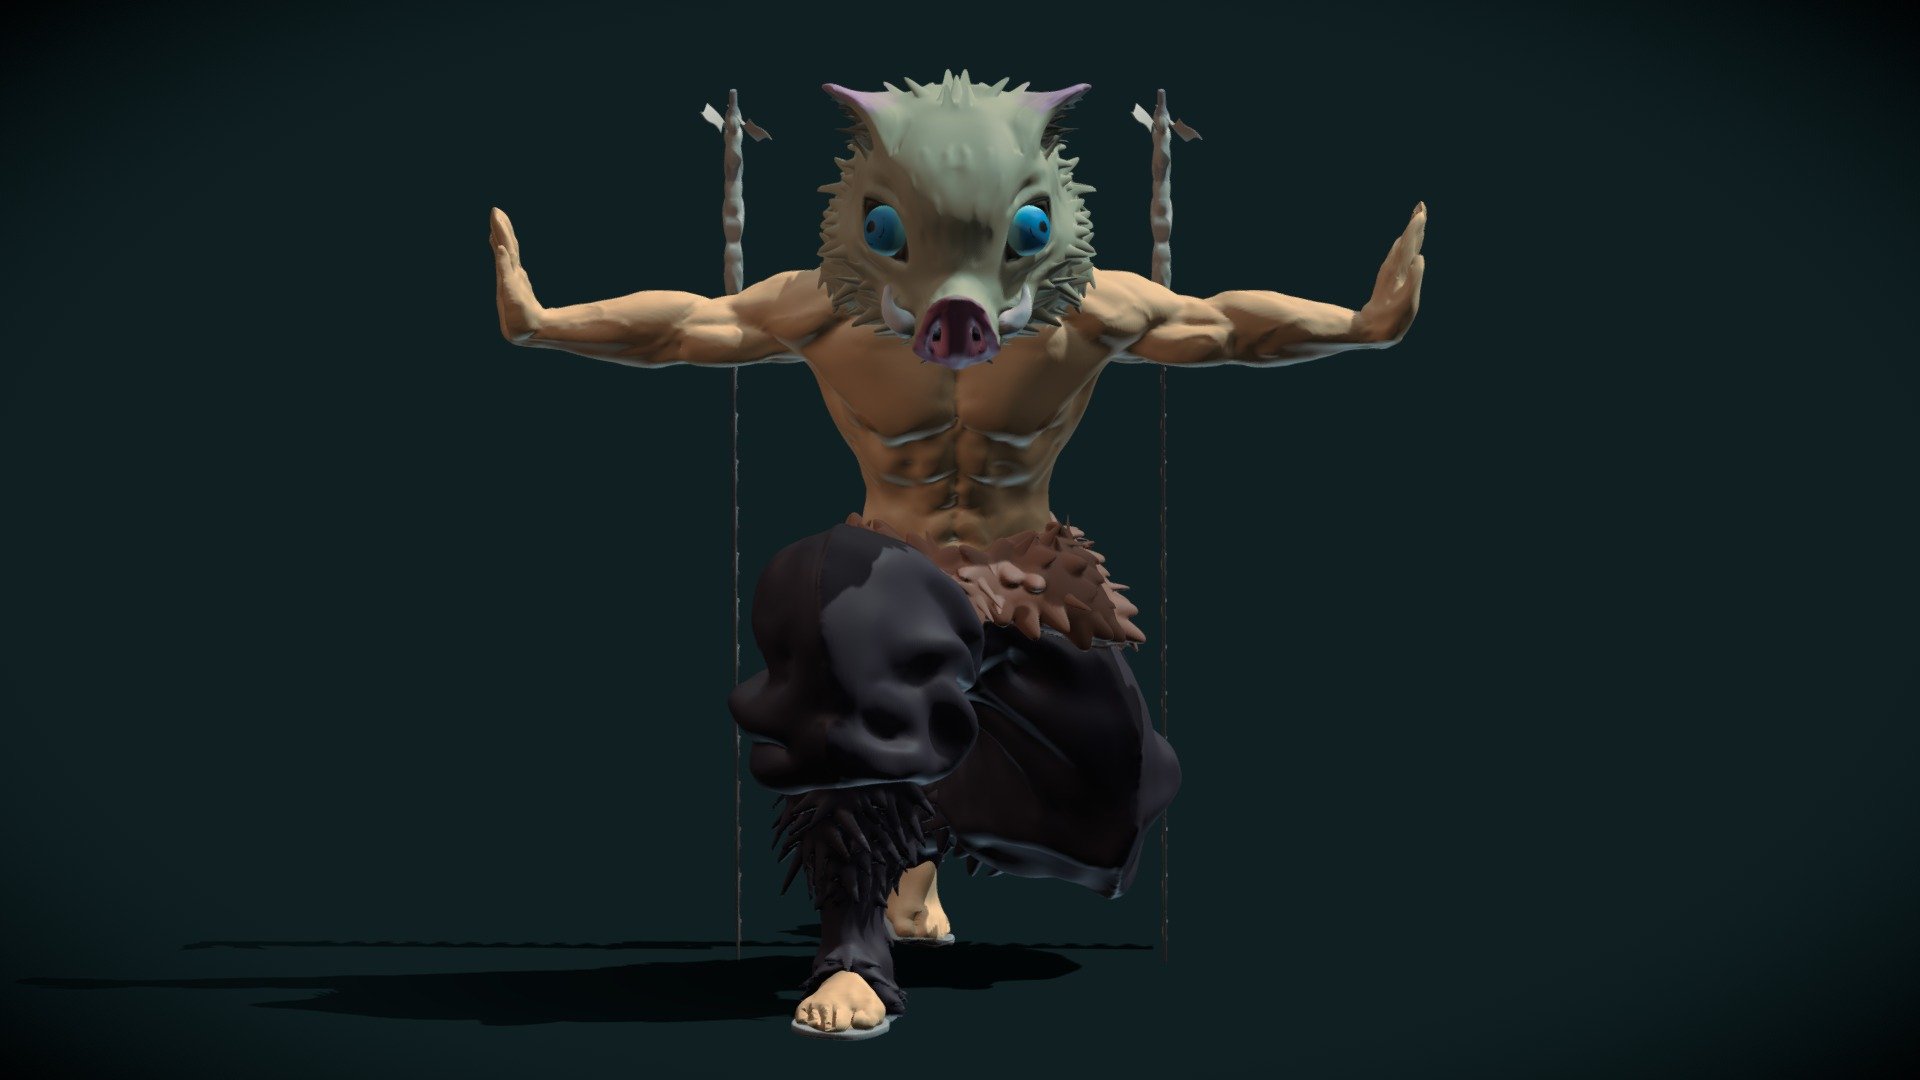 Beast Breathing Sevent Form, Spatial Awareness!

Character: Inosuke Hashibira, from anime Kimetsu no Yaiba (Demon Slayer)



A fanart and arm muscles study.

About download of model:
In the sense of functionality this model is rubbish,
no UV or texture, just vertex color and needs retopology,
use if you can 3d model